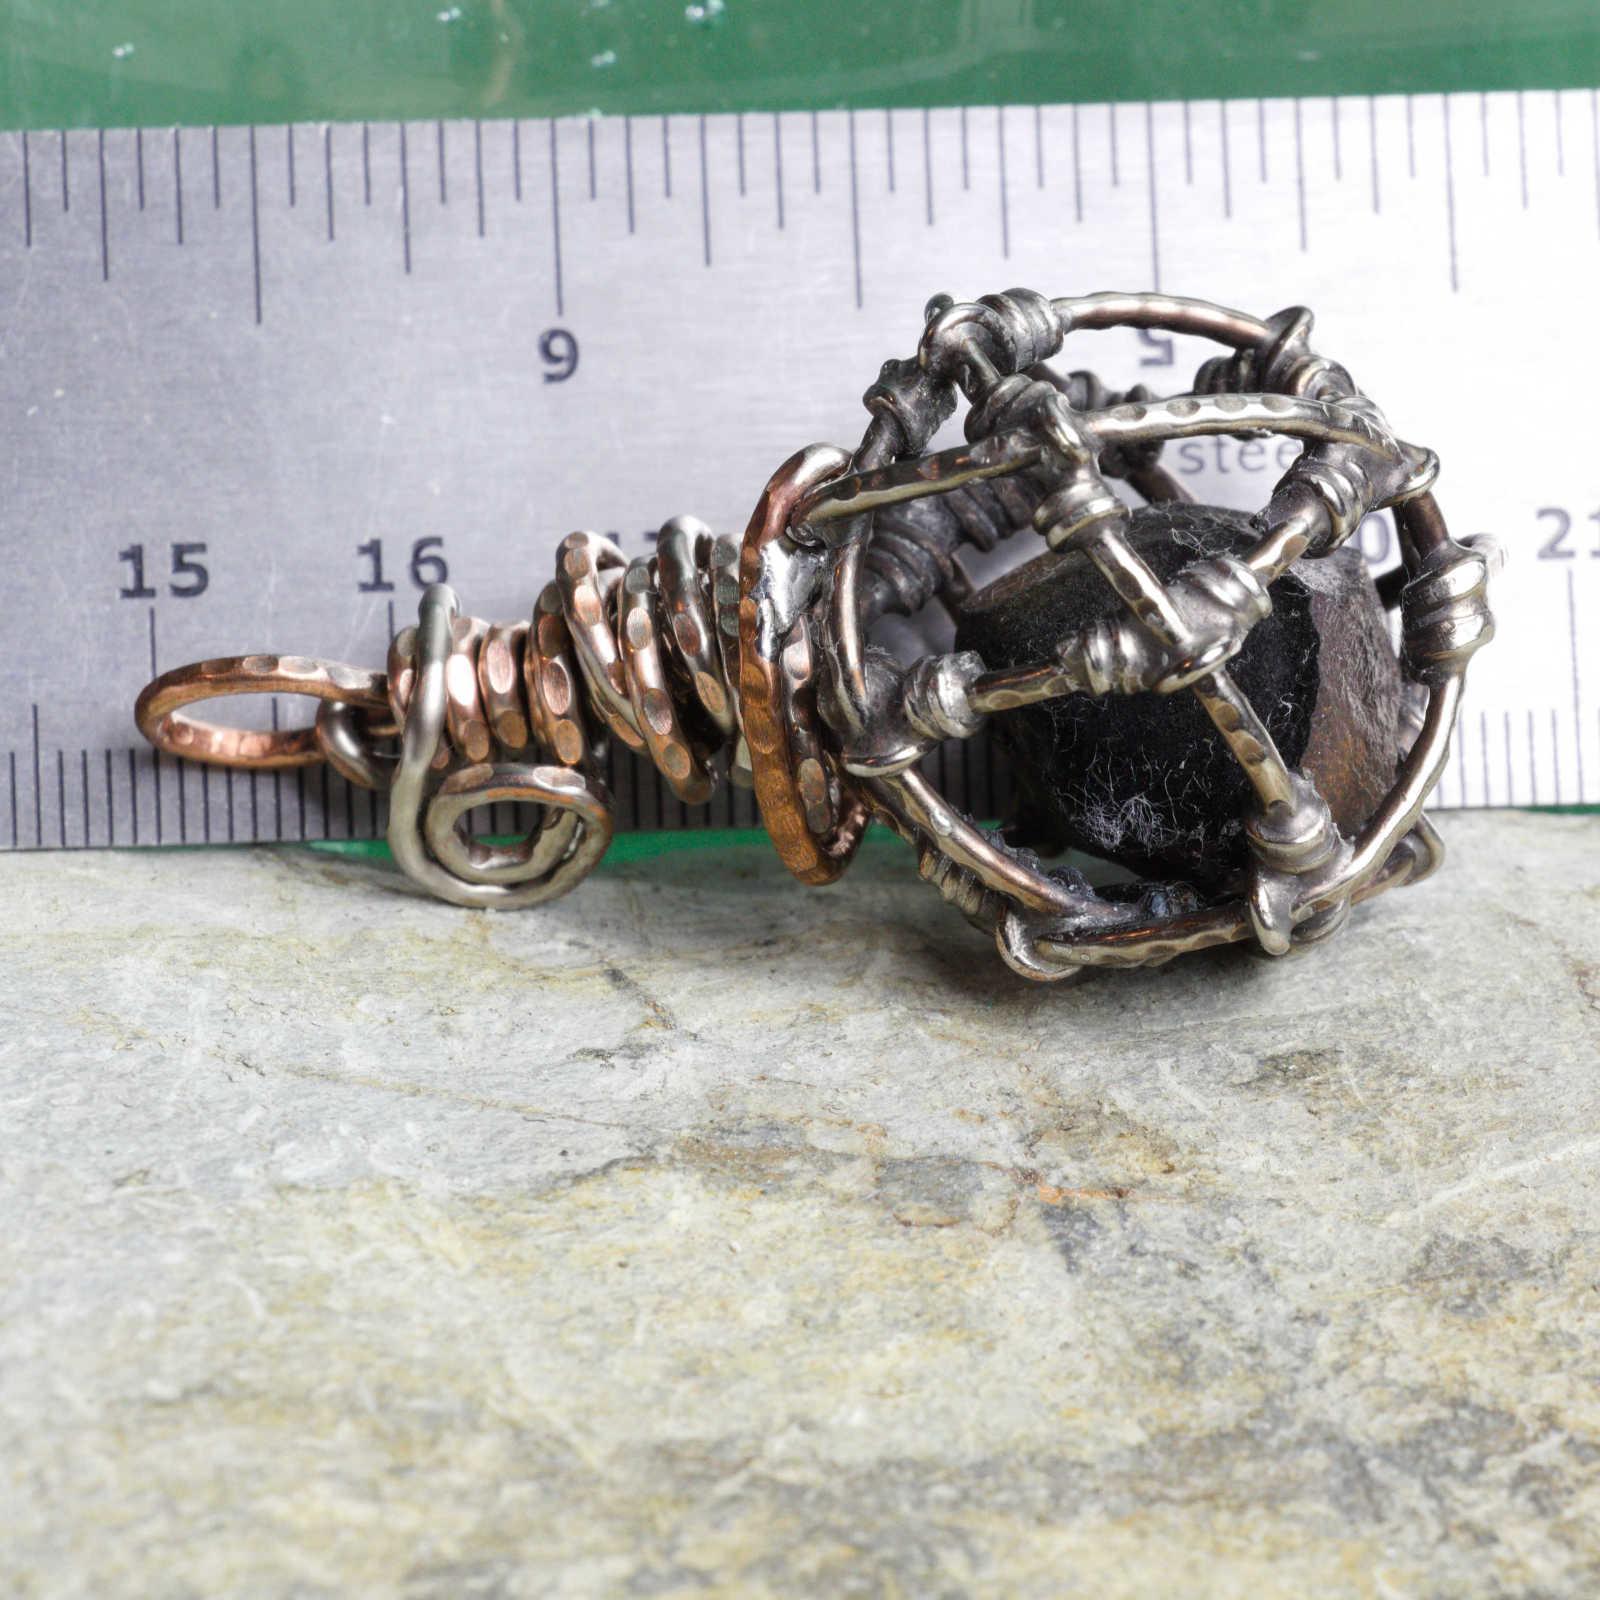 Caged Copper Slag with ruler to show scale